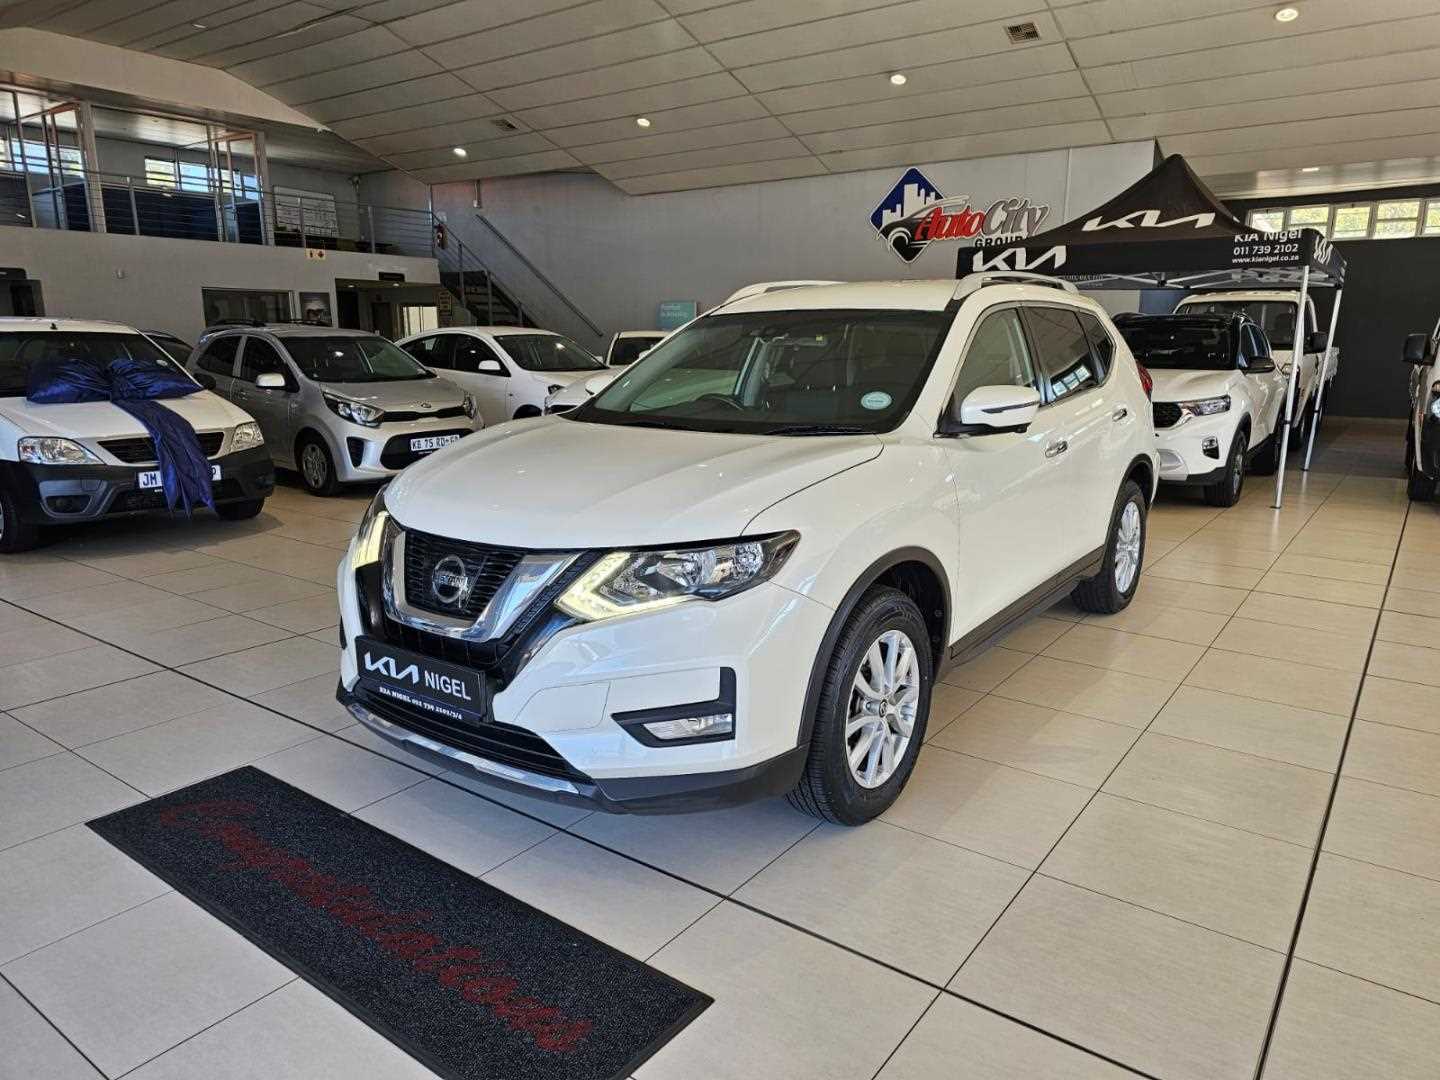 Nissan X TRAIL 2.5 ACENTA PLUS 4X4 CVT 7S for Sale in South Africa